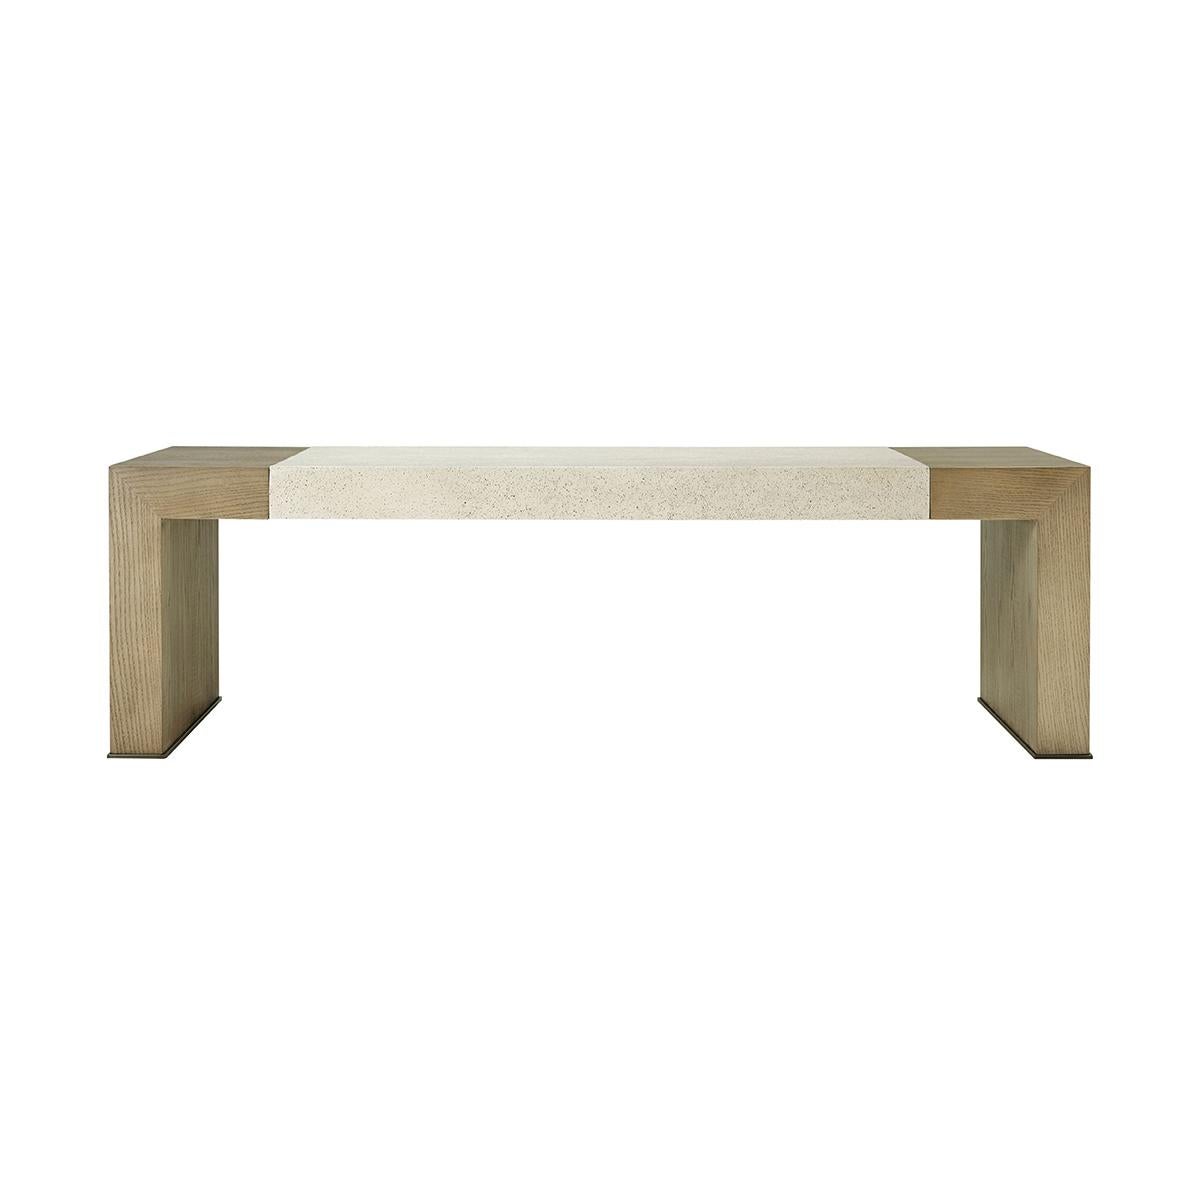 A  modern parsons style cocktail table made of figured cathedral ash in our light dune finish with our exclusive Mineral finish at the top and metal detail at the base of the legs in a bronze finish.
Dimensions: 55